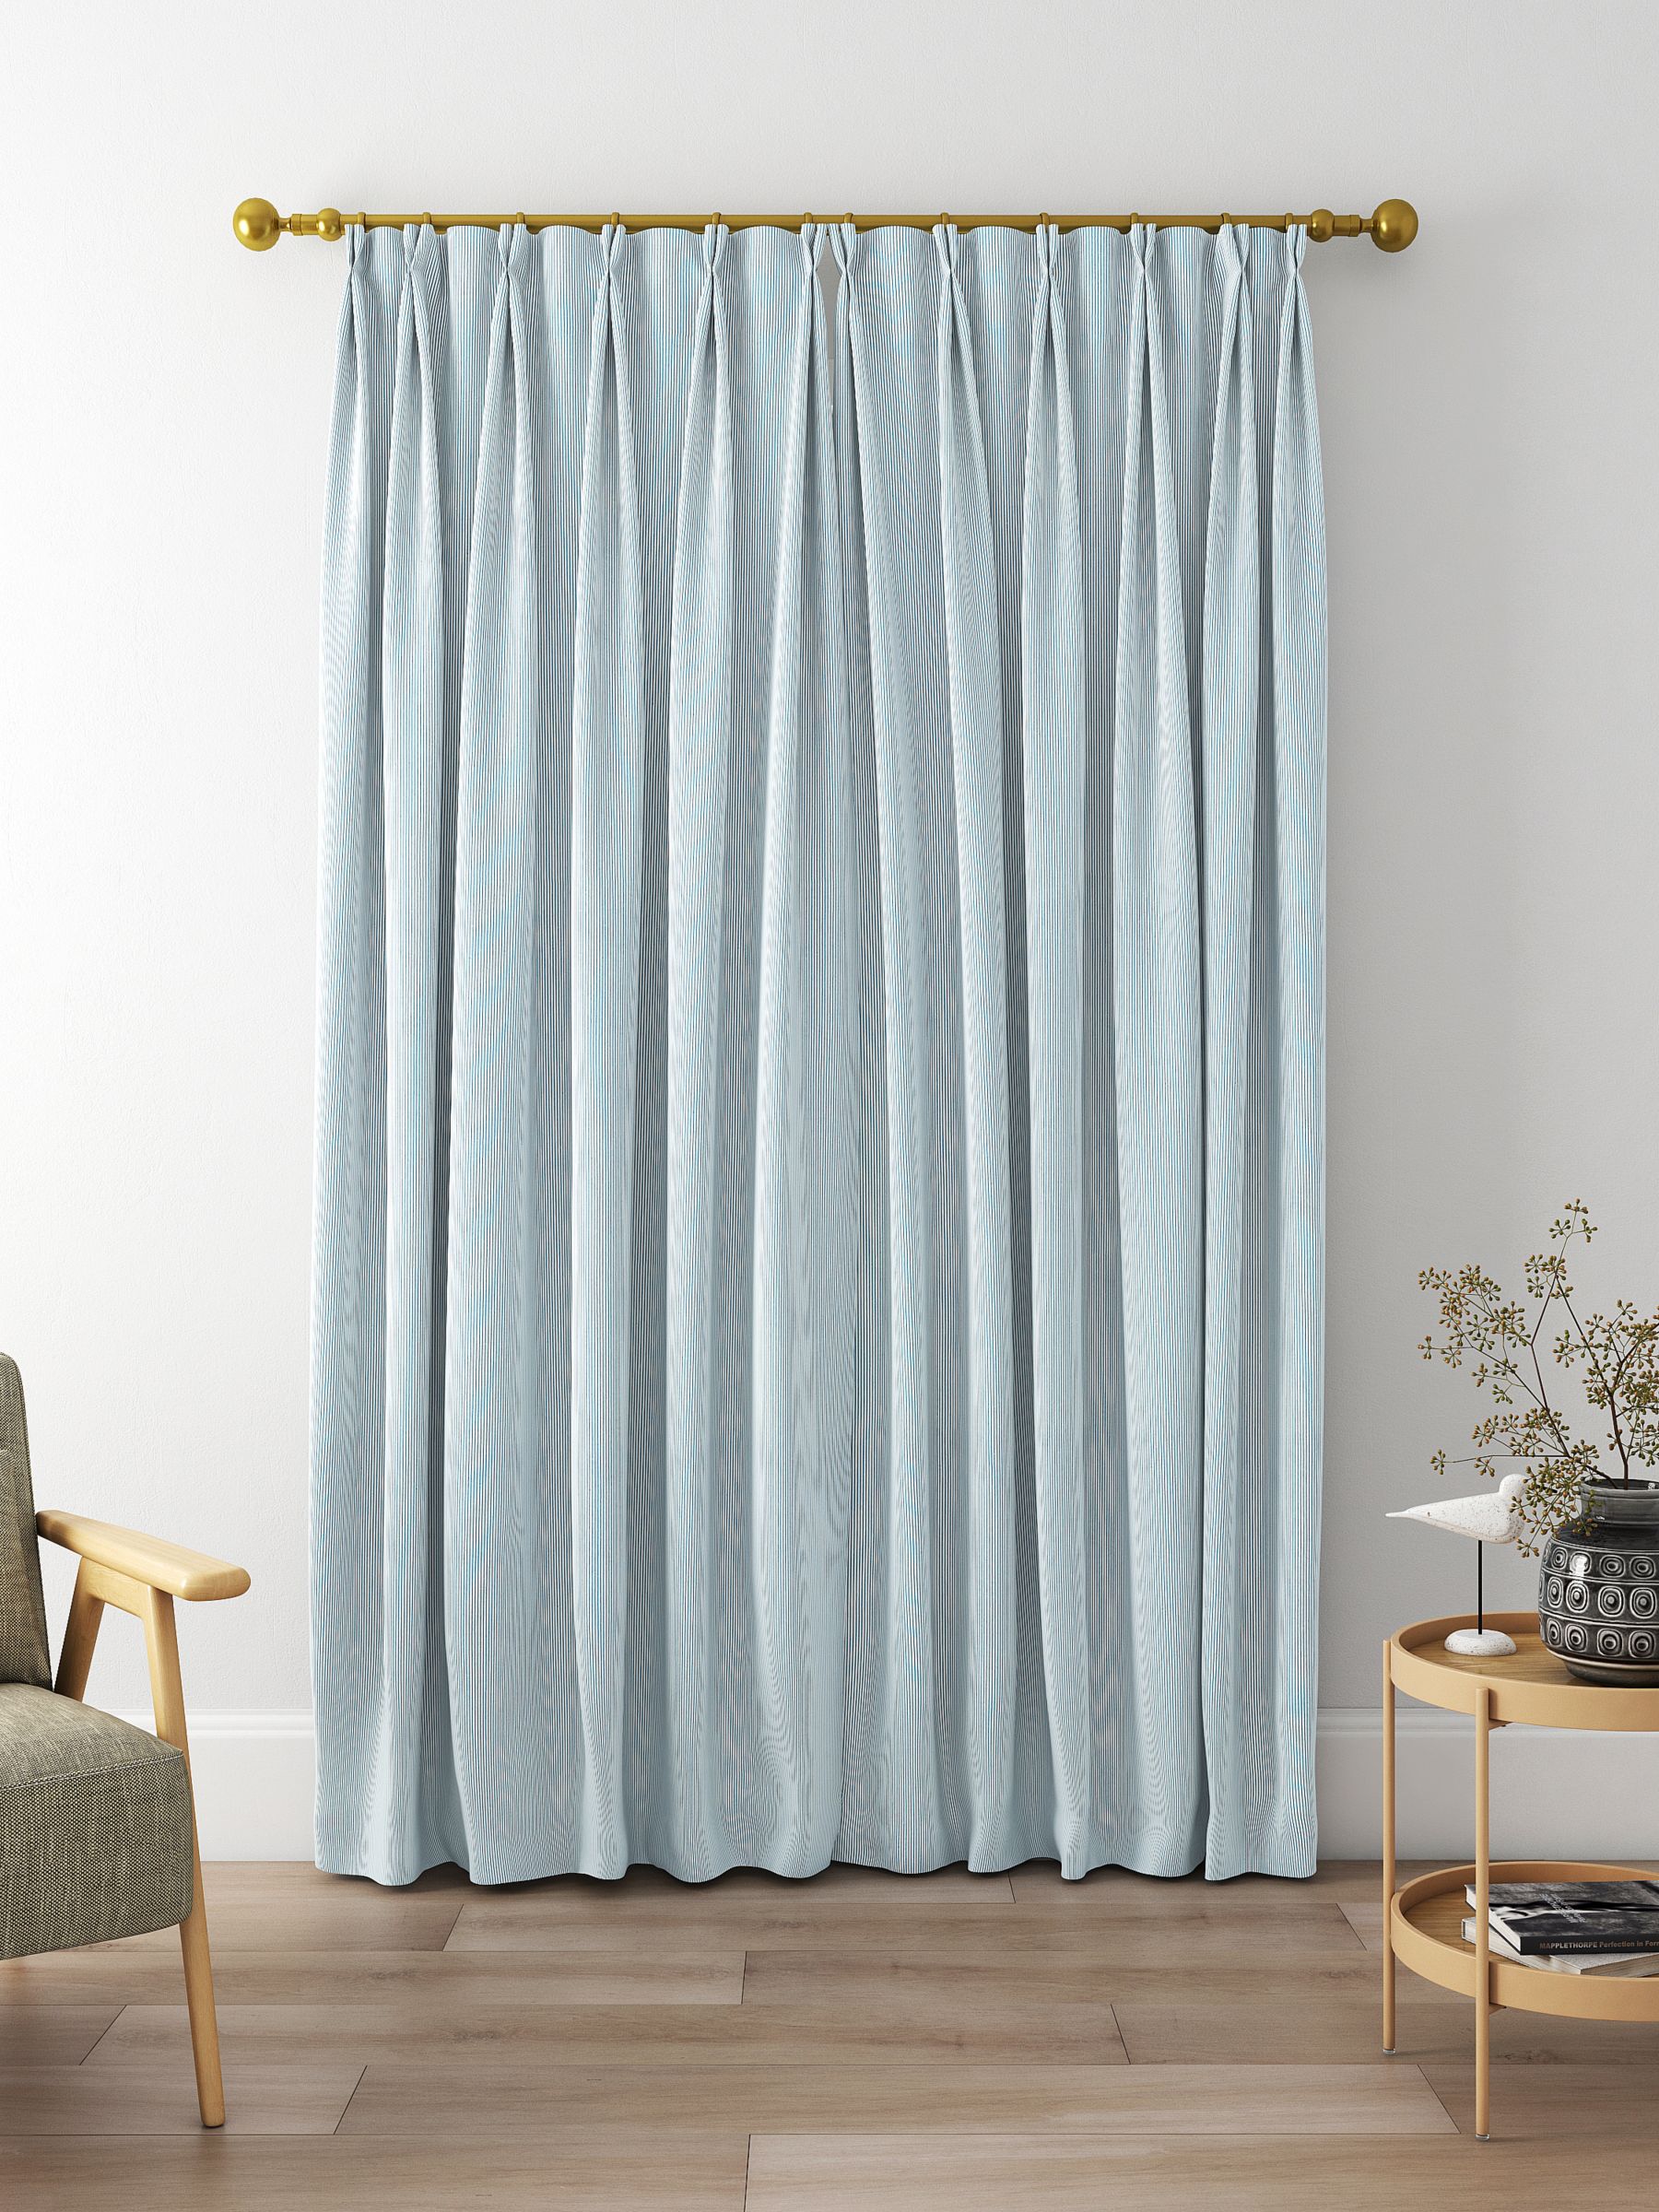 Clarke & Clarke Breton Made to Measure Curtains, Chambray